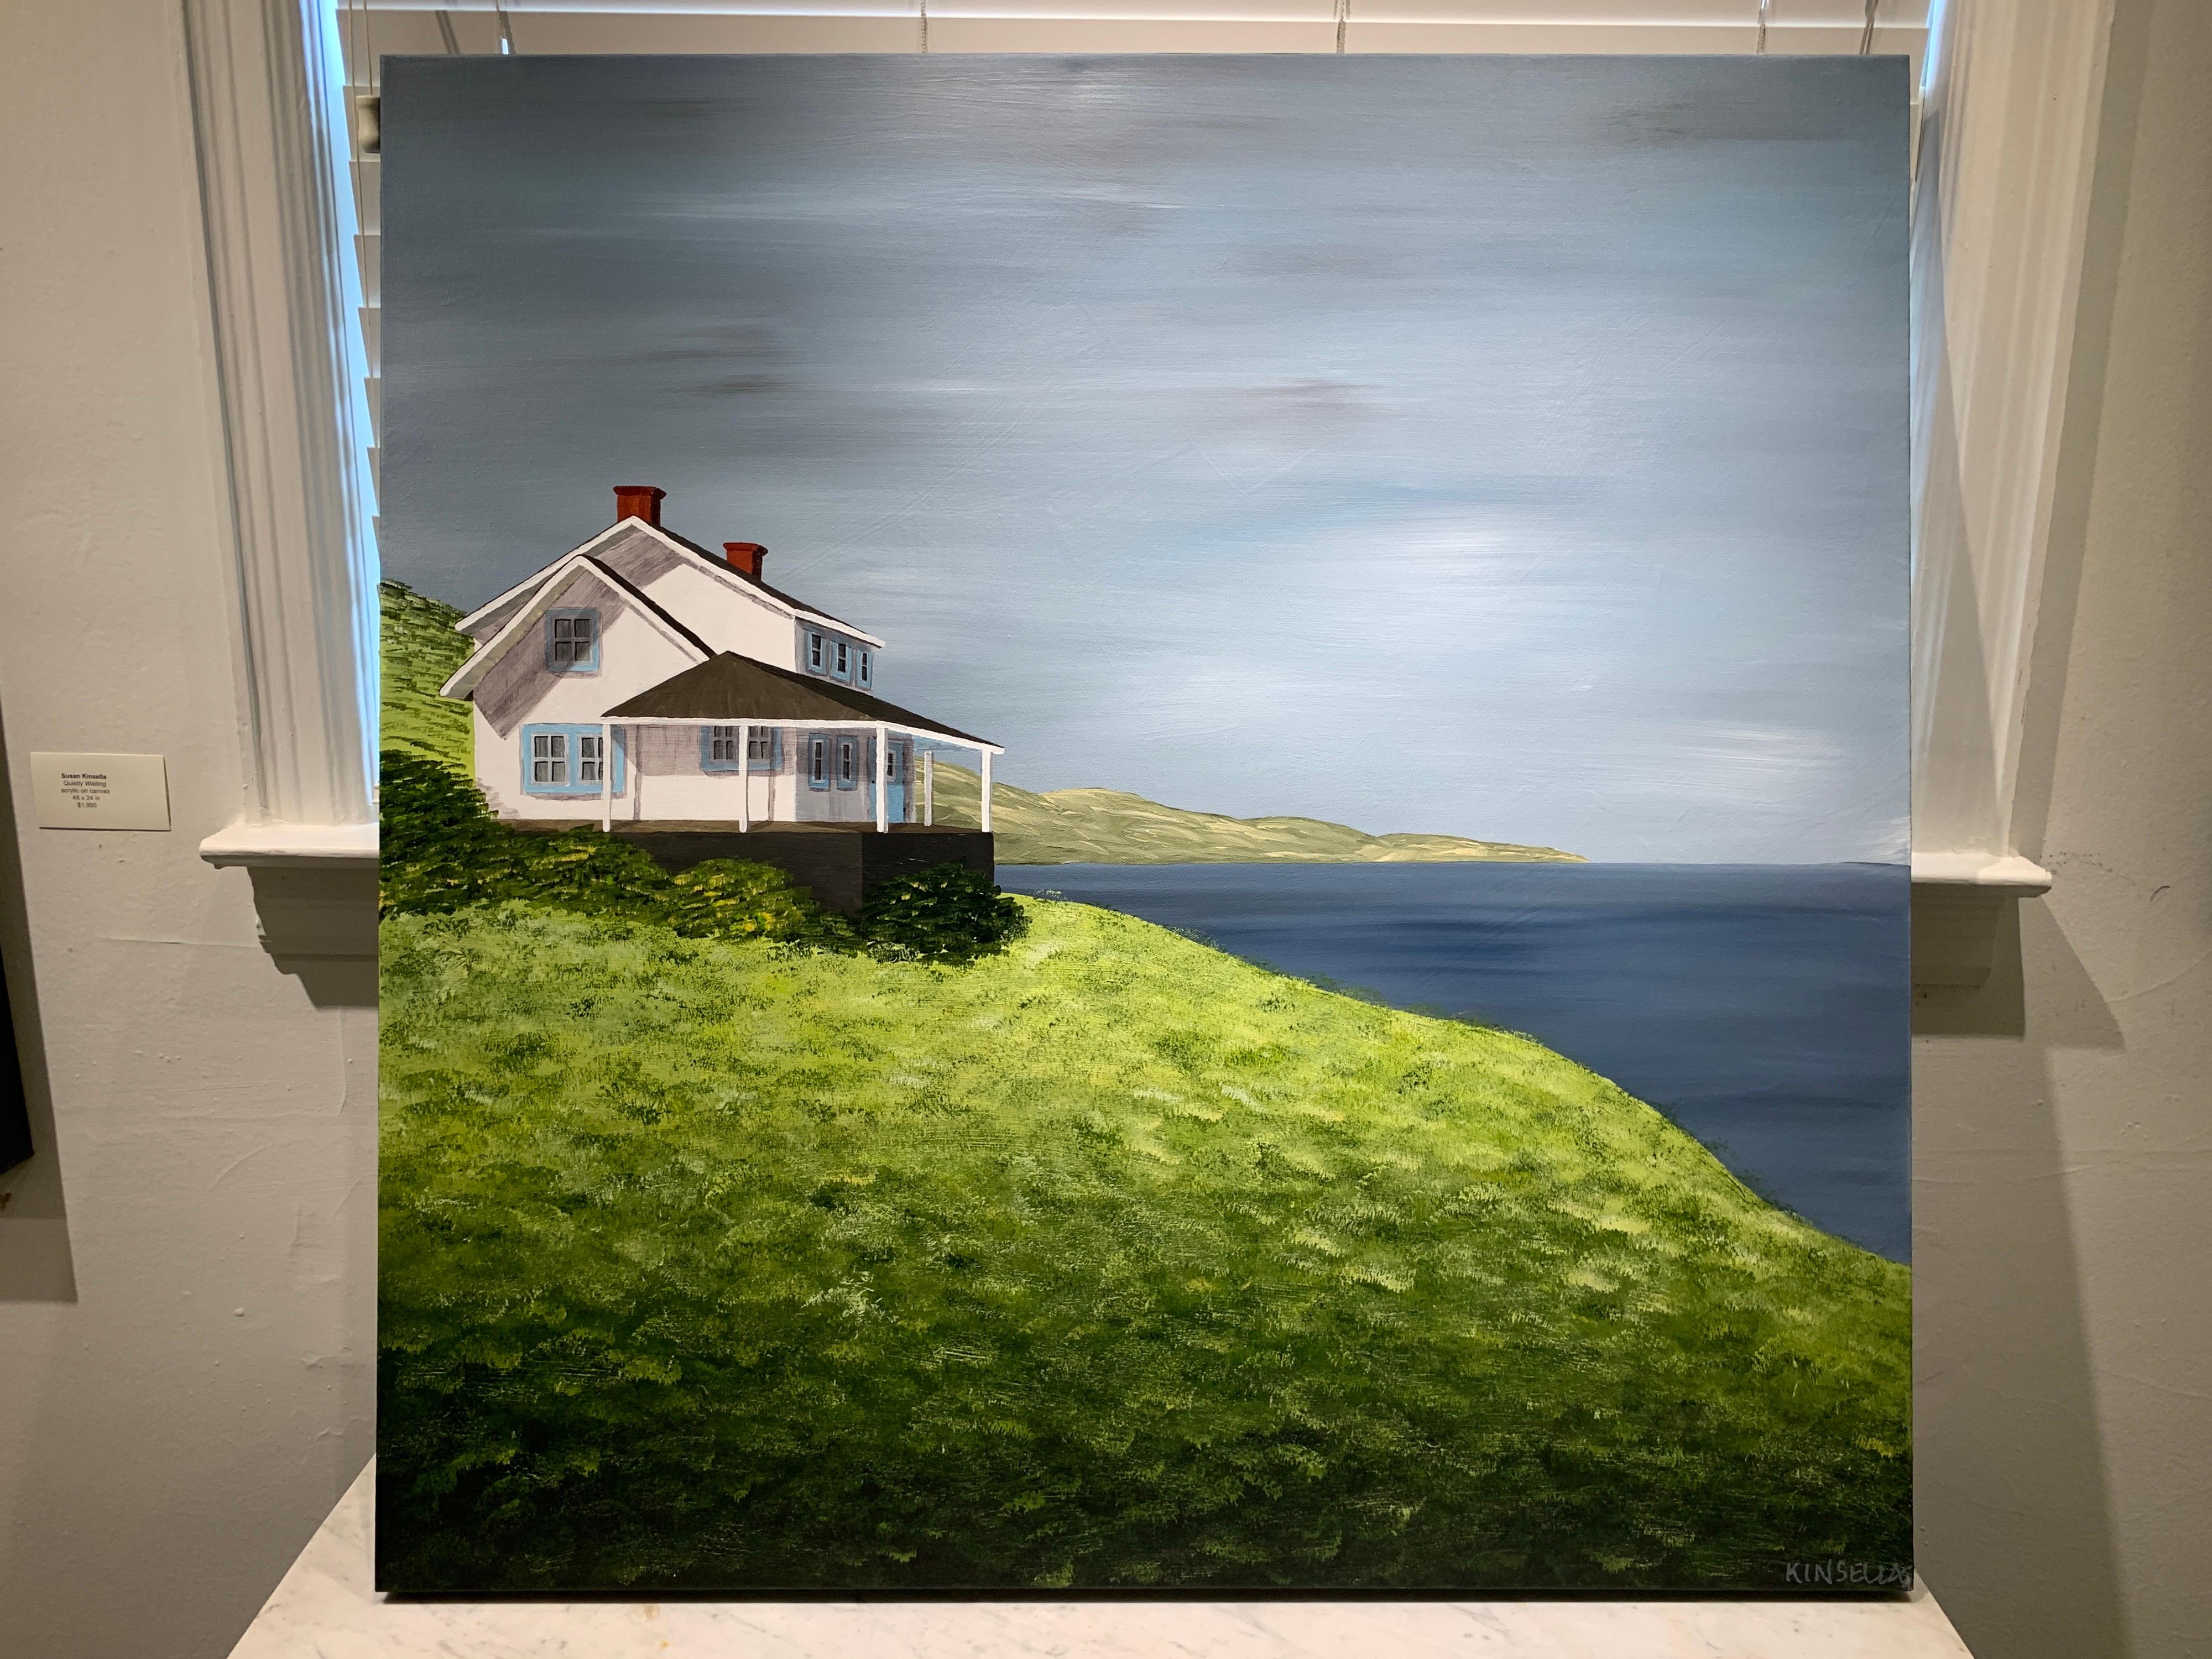 Above the Bay by Susan Kinsella, square contemporary landscape 2